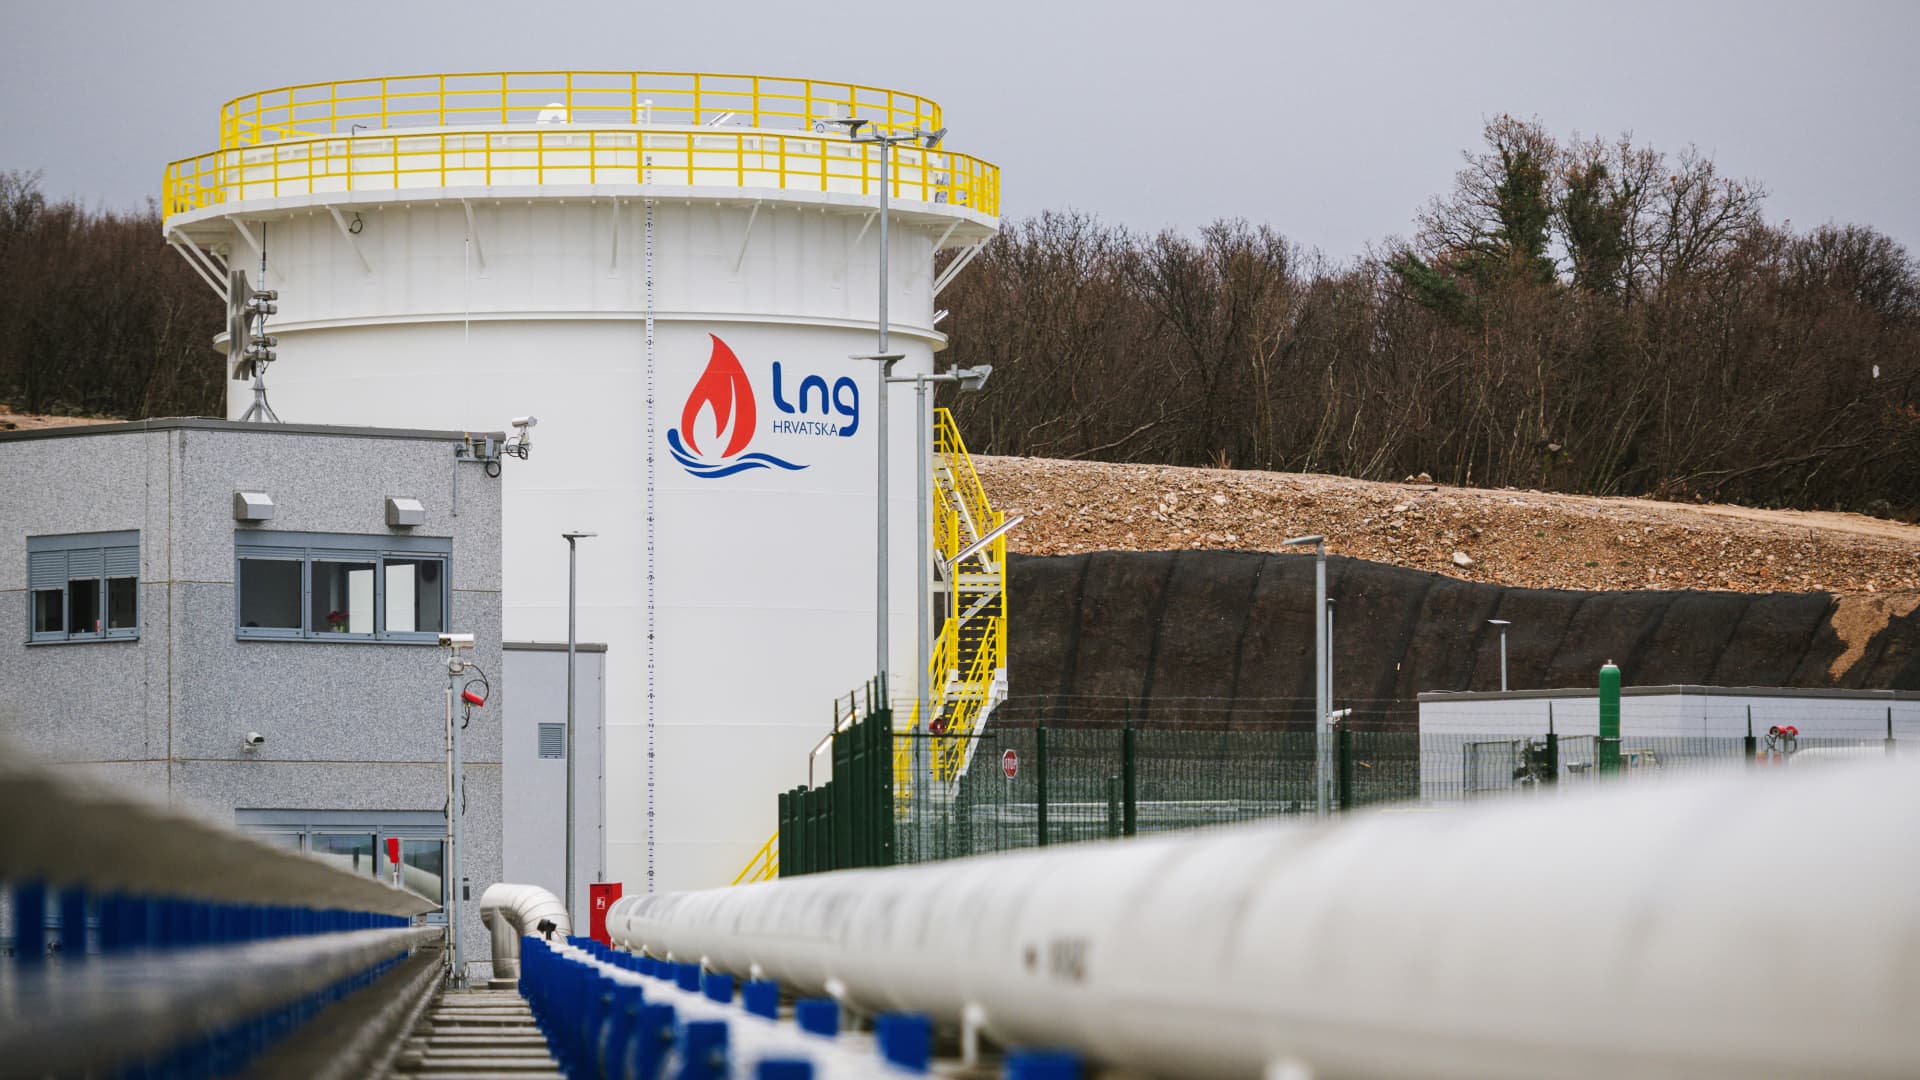 Natural gas surges to highest level since 2008 as Russia’s war upends energy markets